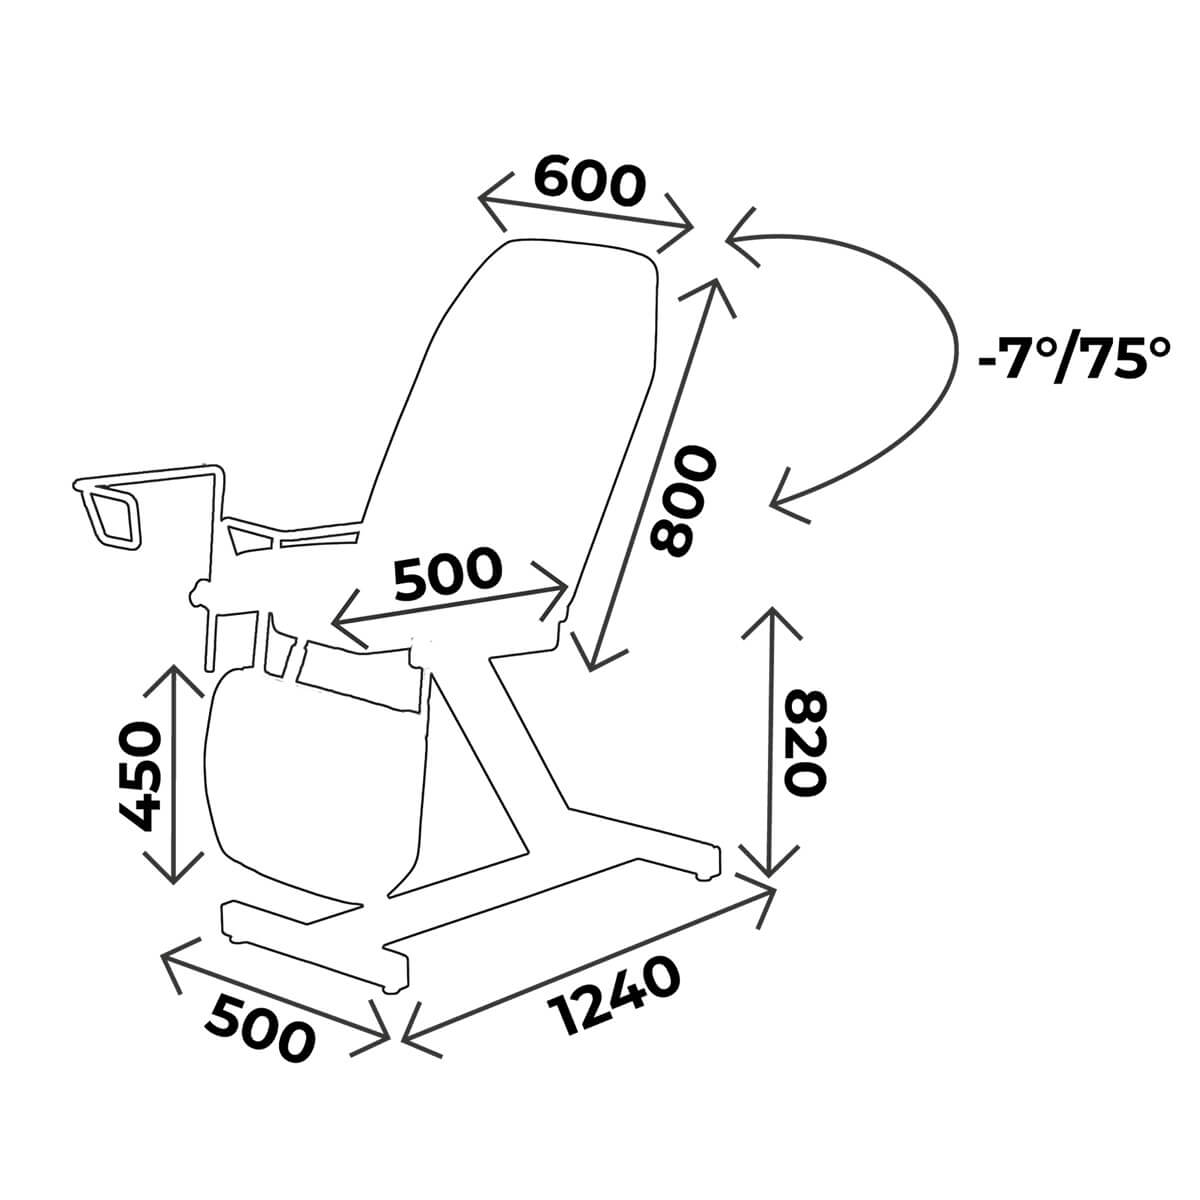 Gynaecological chair 3 sections, with stirrups